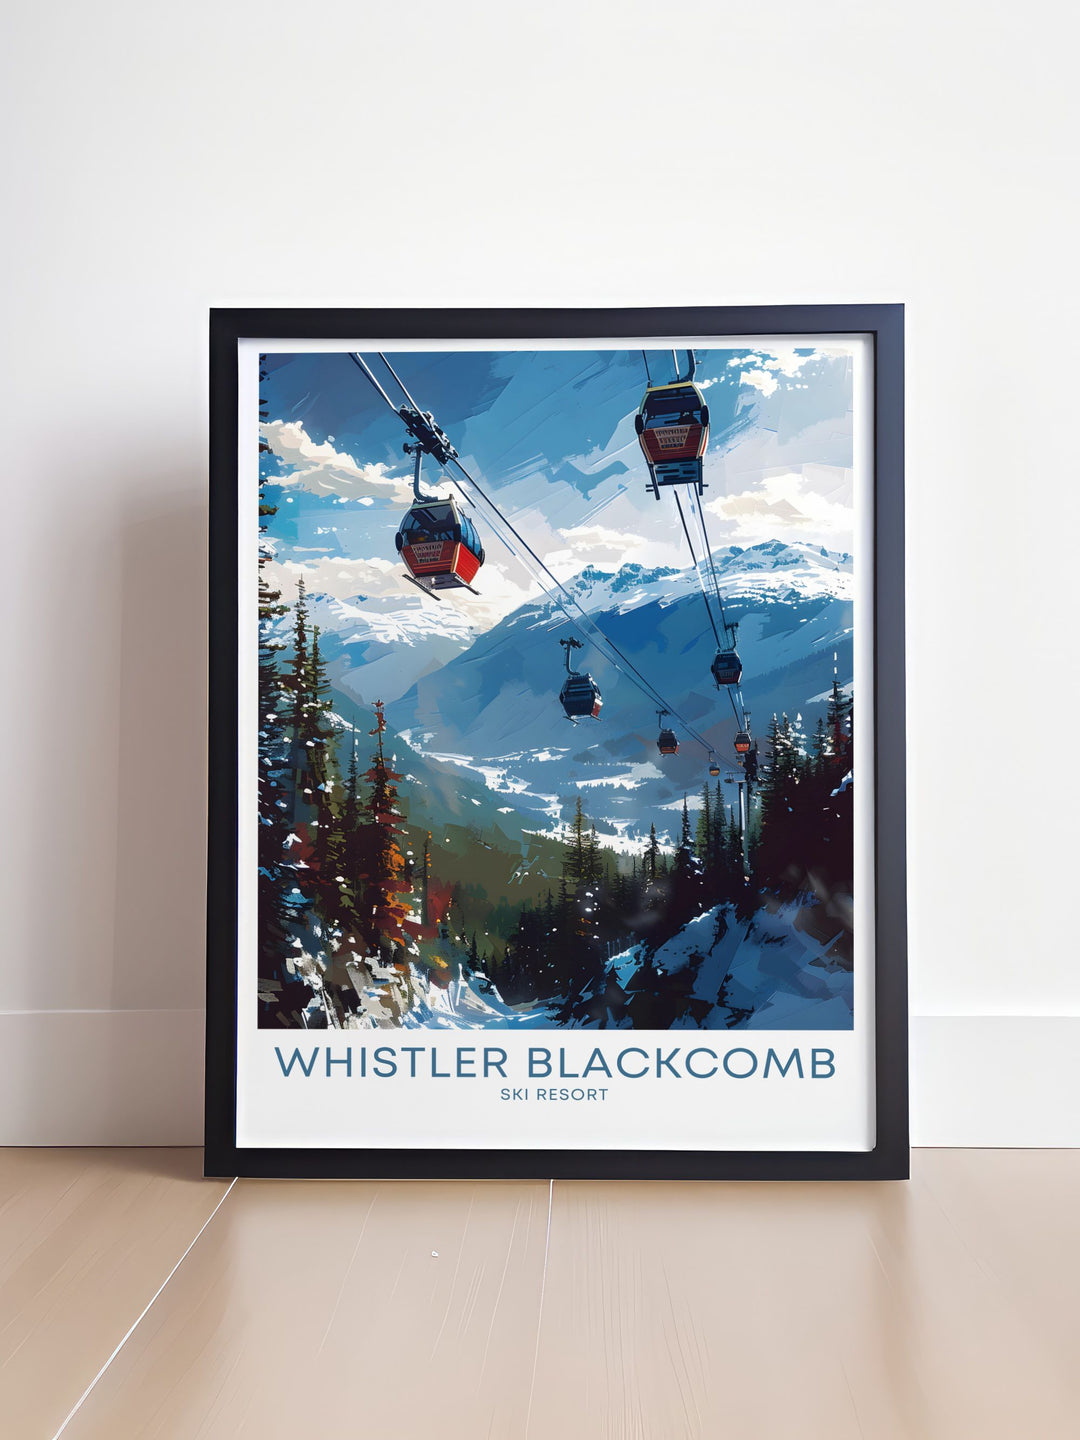 Peak 2 Peak Gondola travel poster from Whistler Canada, highlighting the scenic views and thrilling slopes of Whistler Blackcomb, a unique gift for winter sports enthusiasts and art lovers alike.